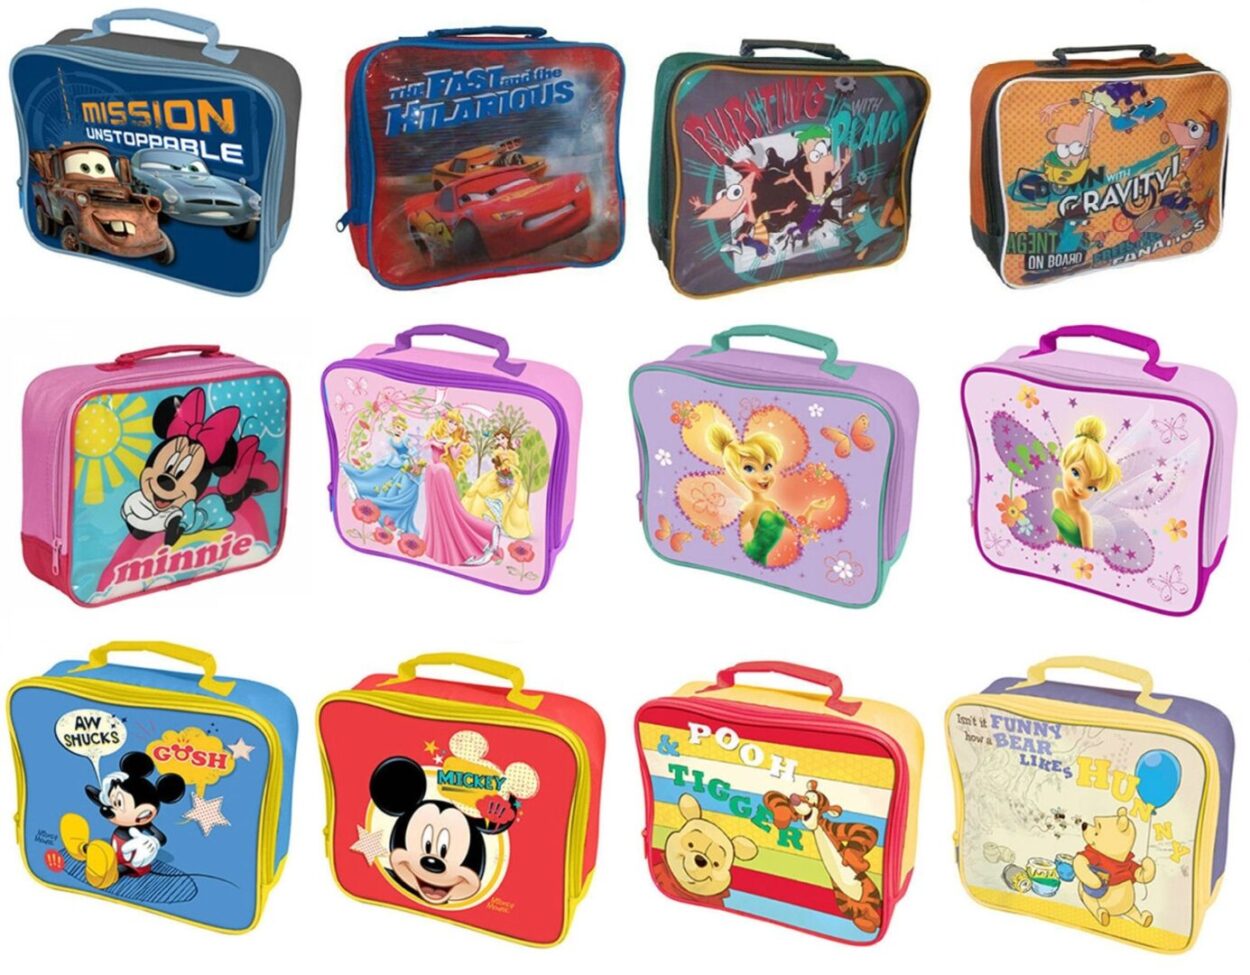 Childresn Disney Cartoon Lunch Boxes